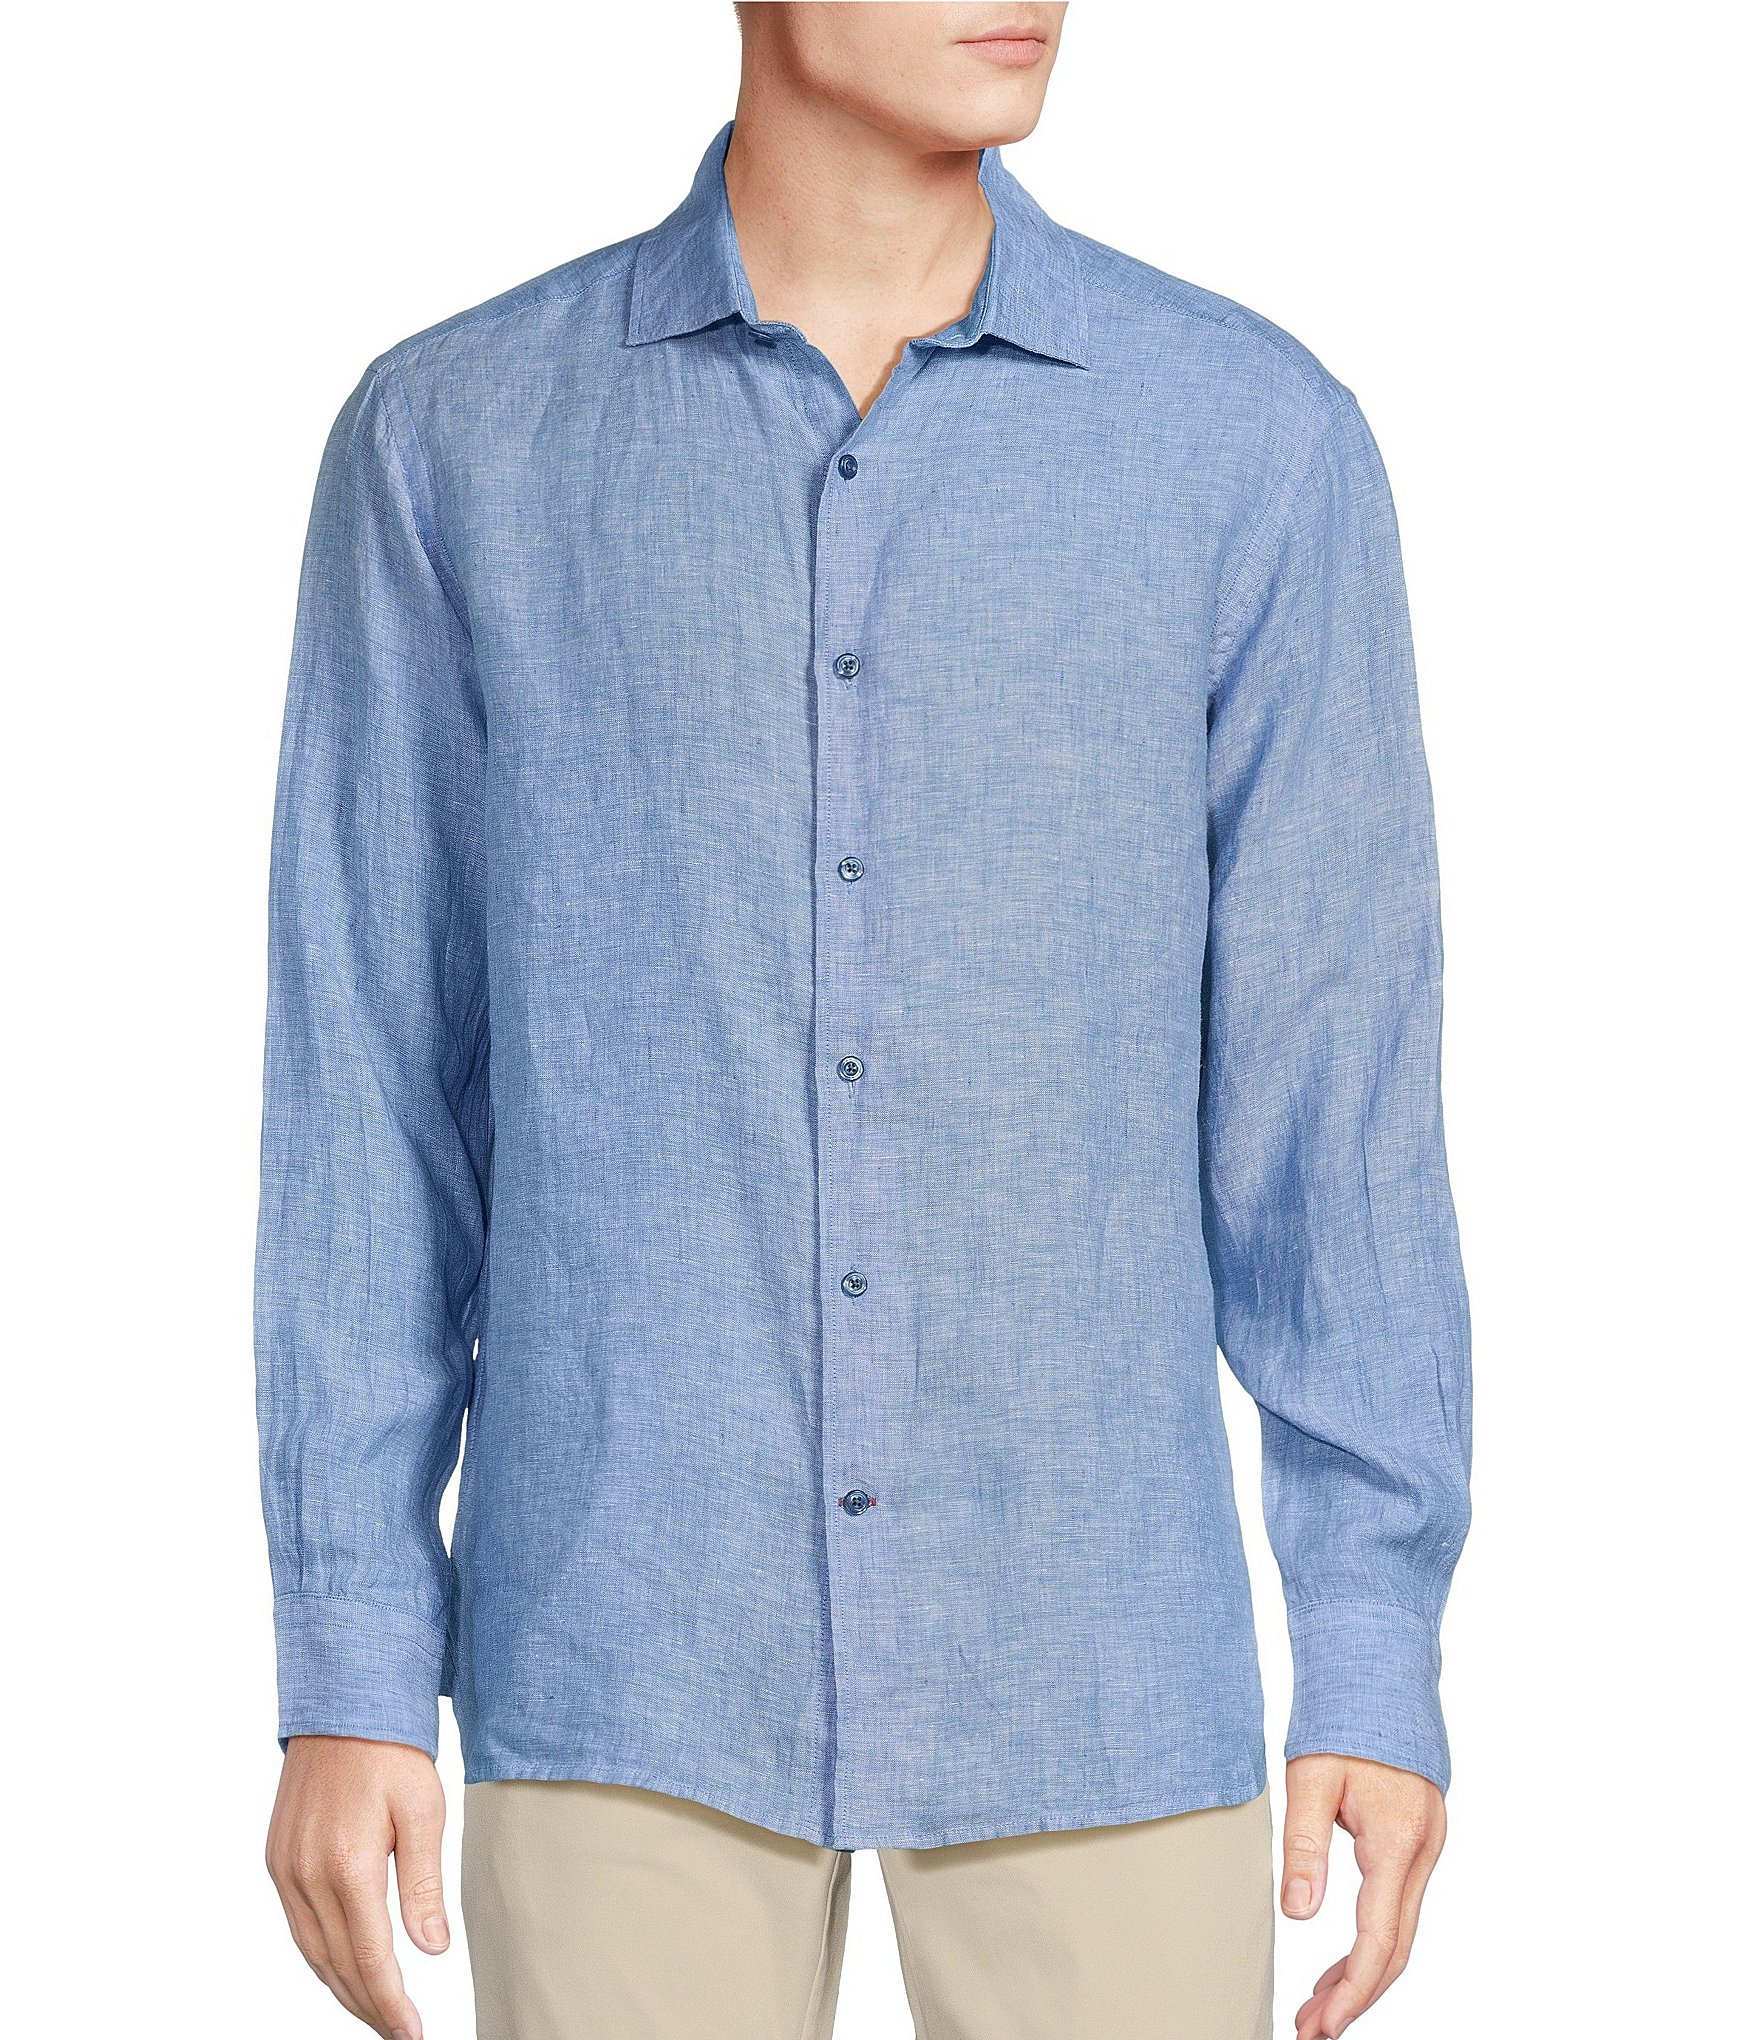 Cremieux Blue Label Slim Fit Solid Flex Twill Long Sleeve Woven